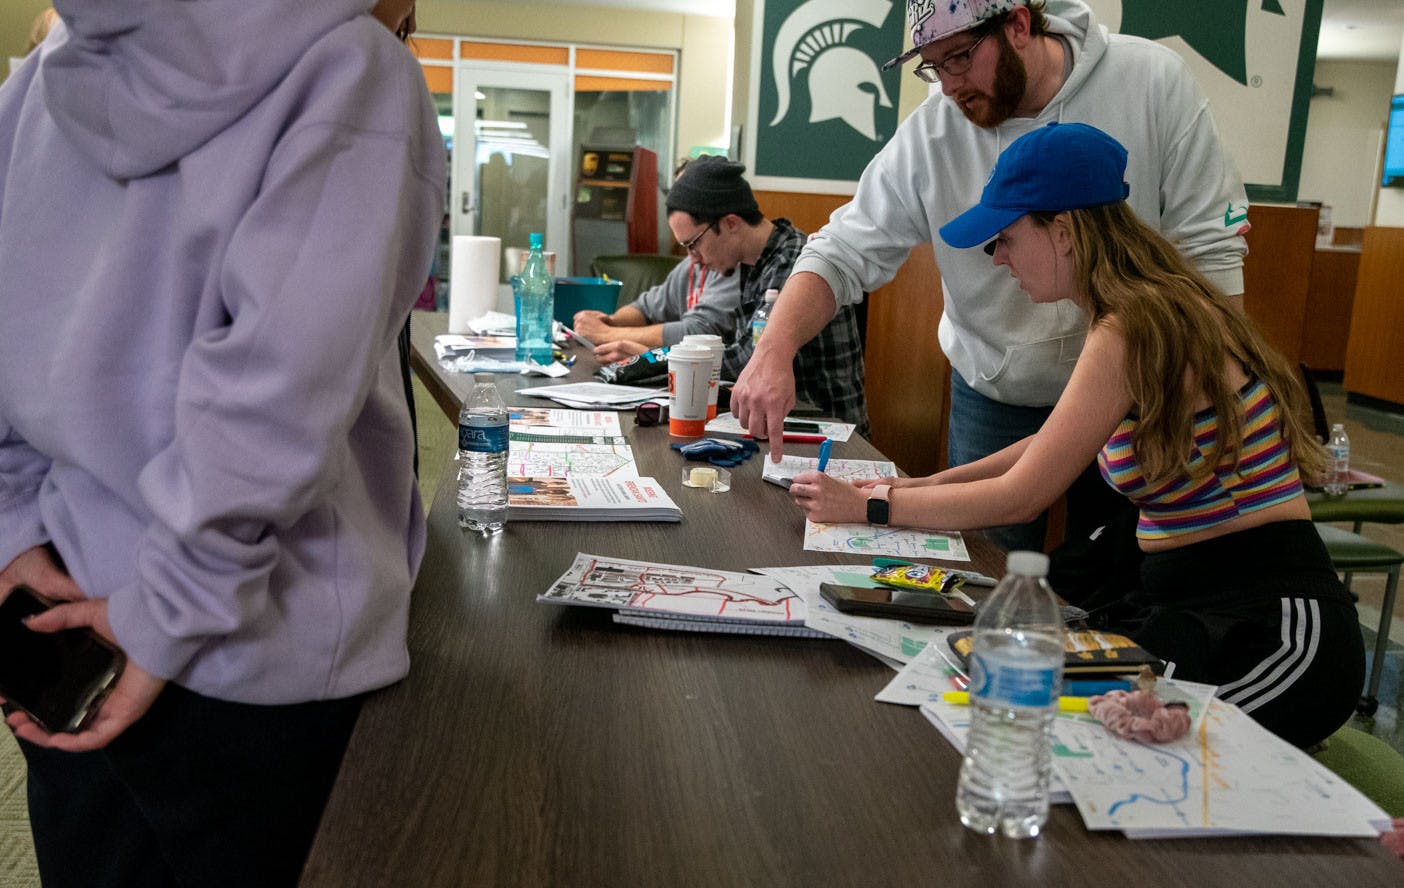 <p>Volunteers help guide search parties at the MSU Union by handing out maps on what areas have not been searched yet. Volunteers came together on Nov. 6 to look for Brendan Santo, who went missing on campus on Oct. 29. Shot on Nov. 6, 2021.</p>